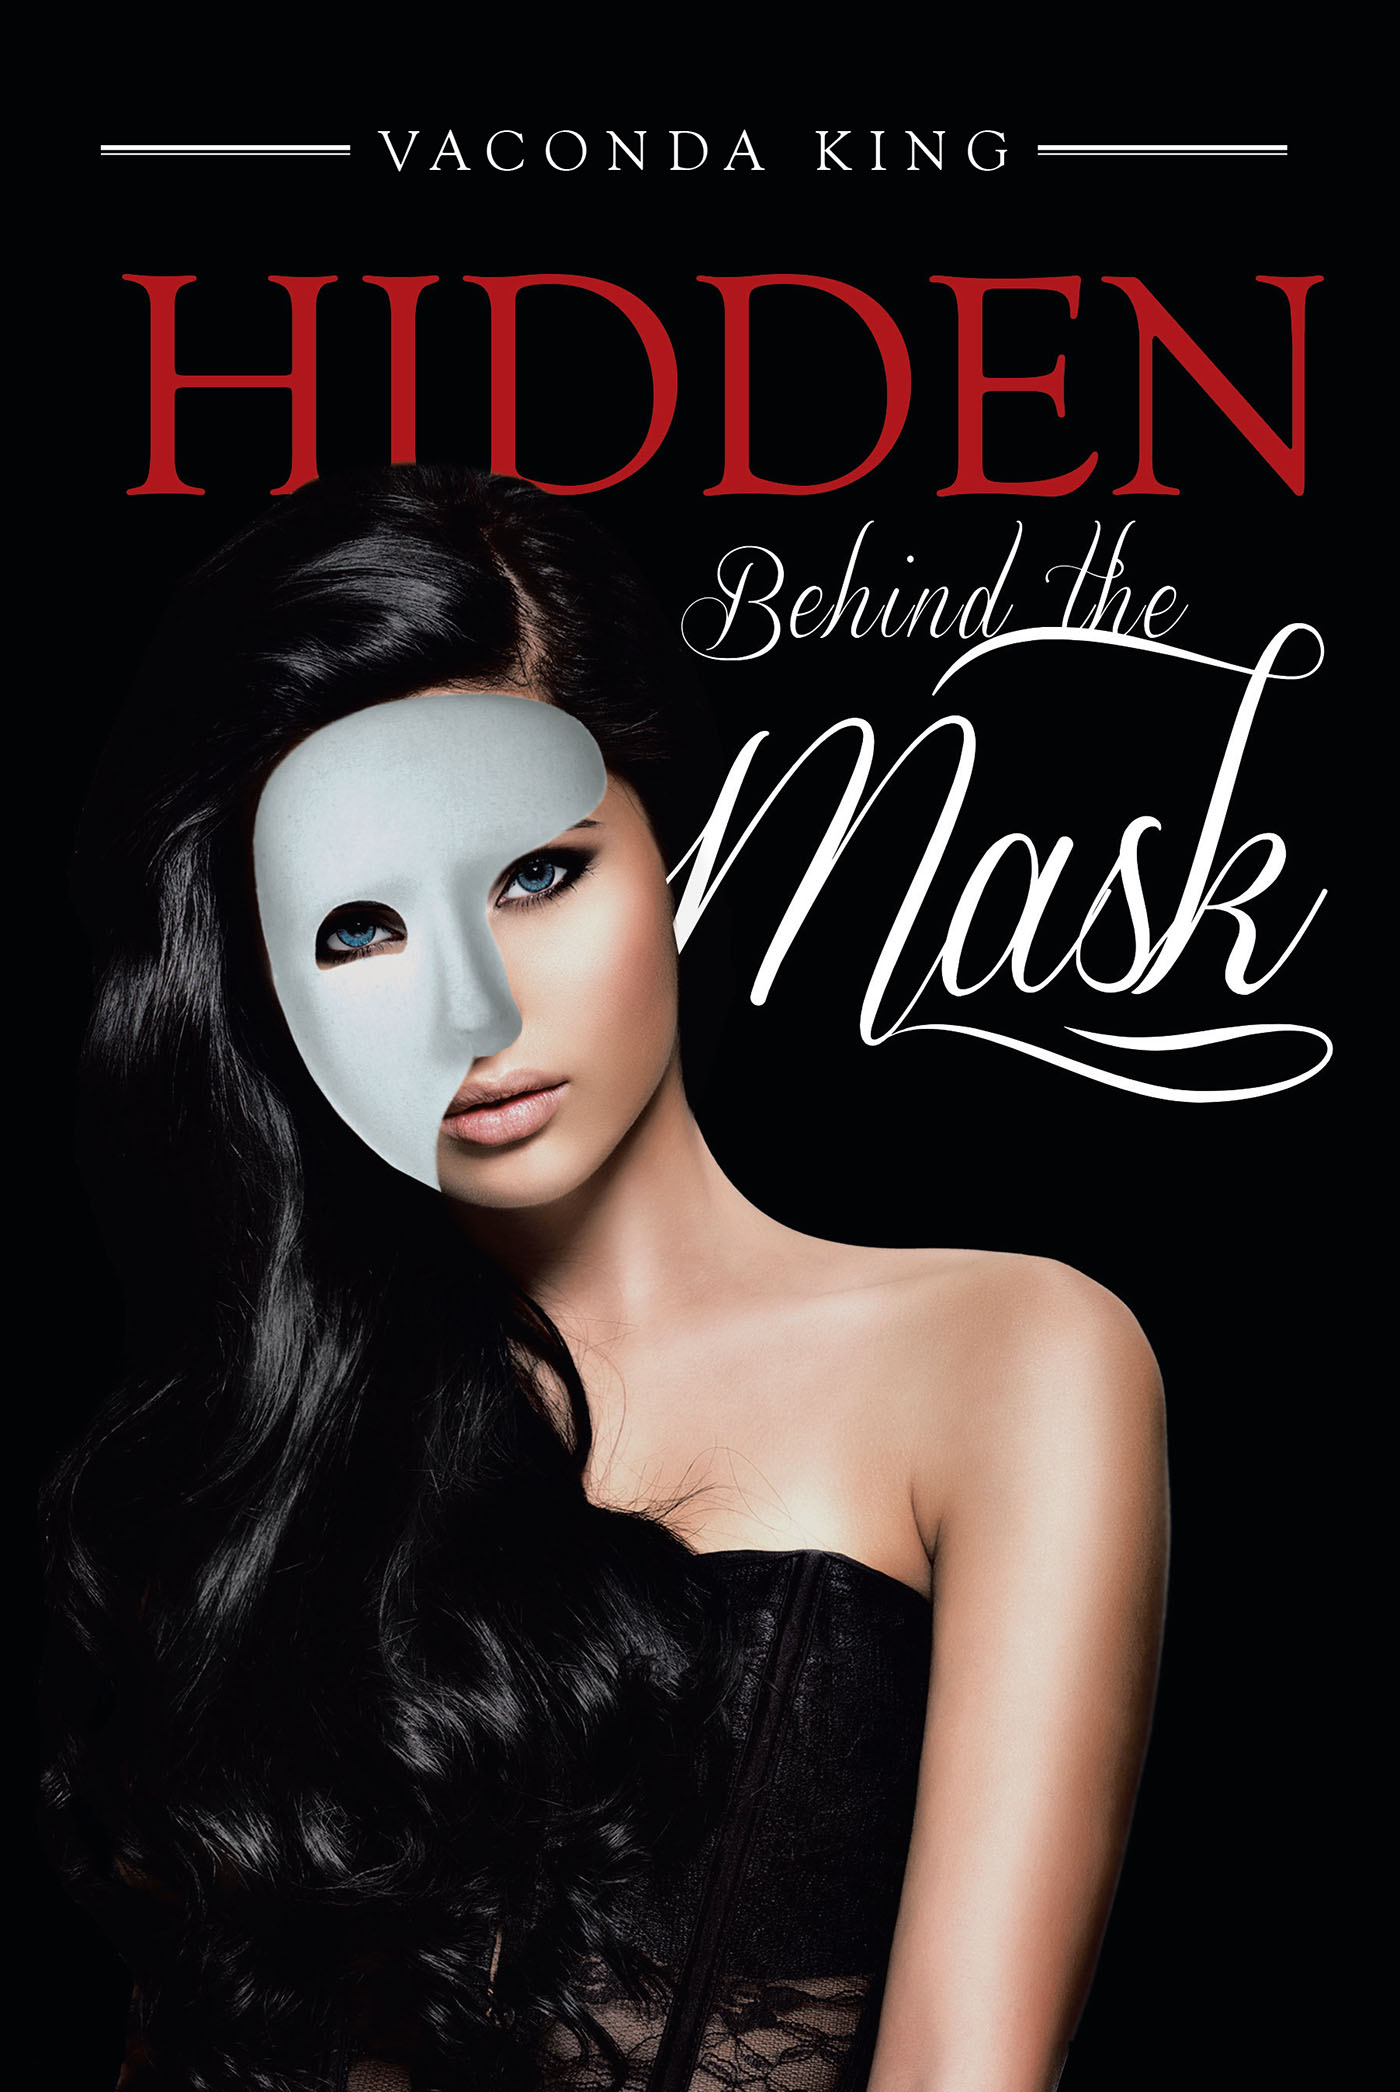 Vaconda King S New Book “hidden Behind The Mask” Is The Exciting Story